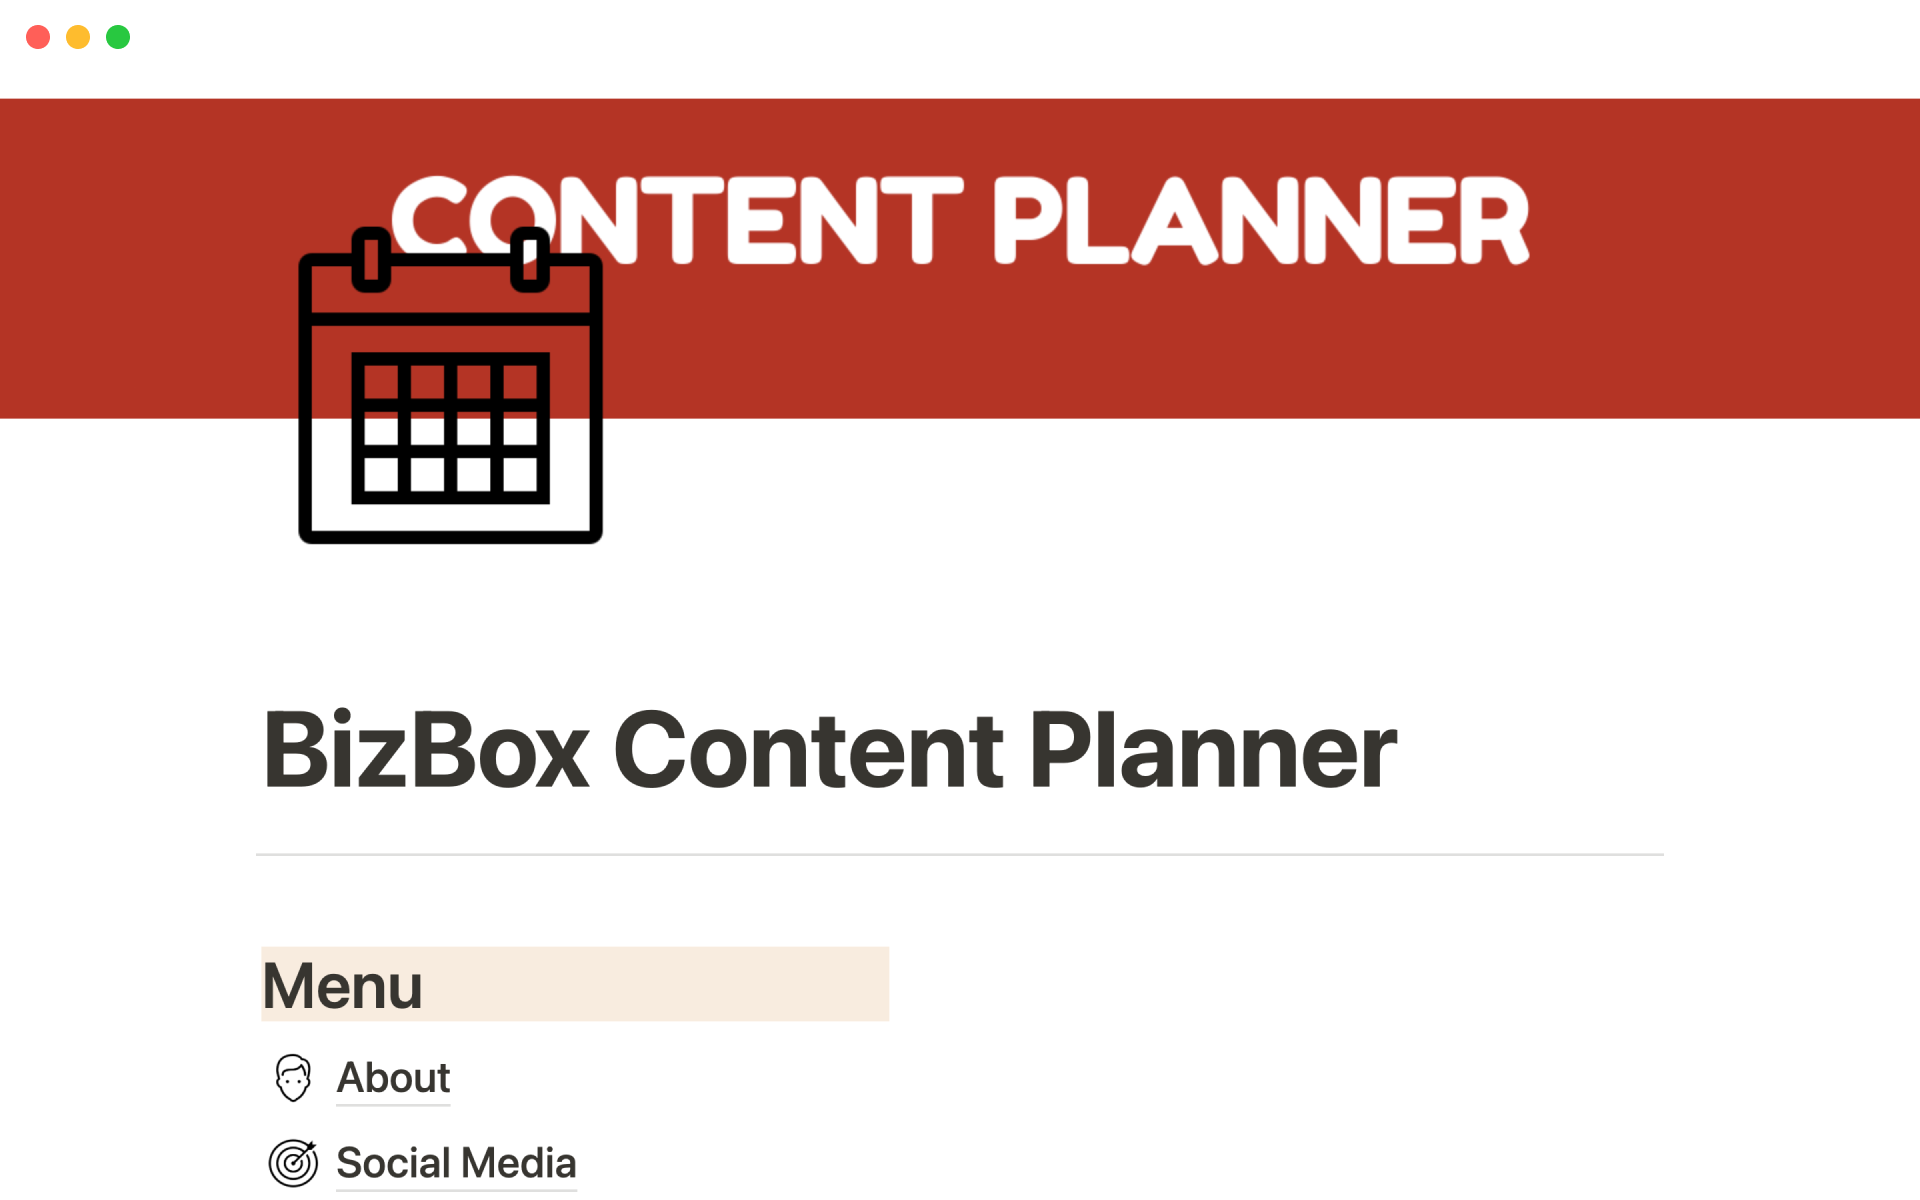 Plan all your brand content in one, centralized place.